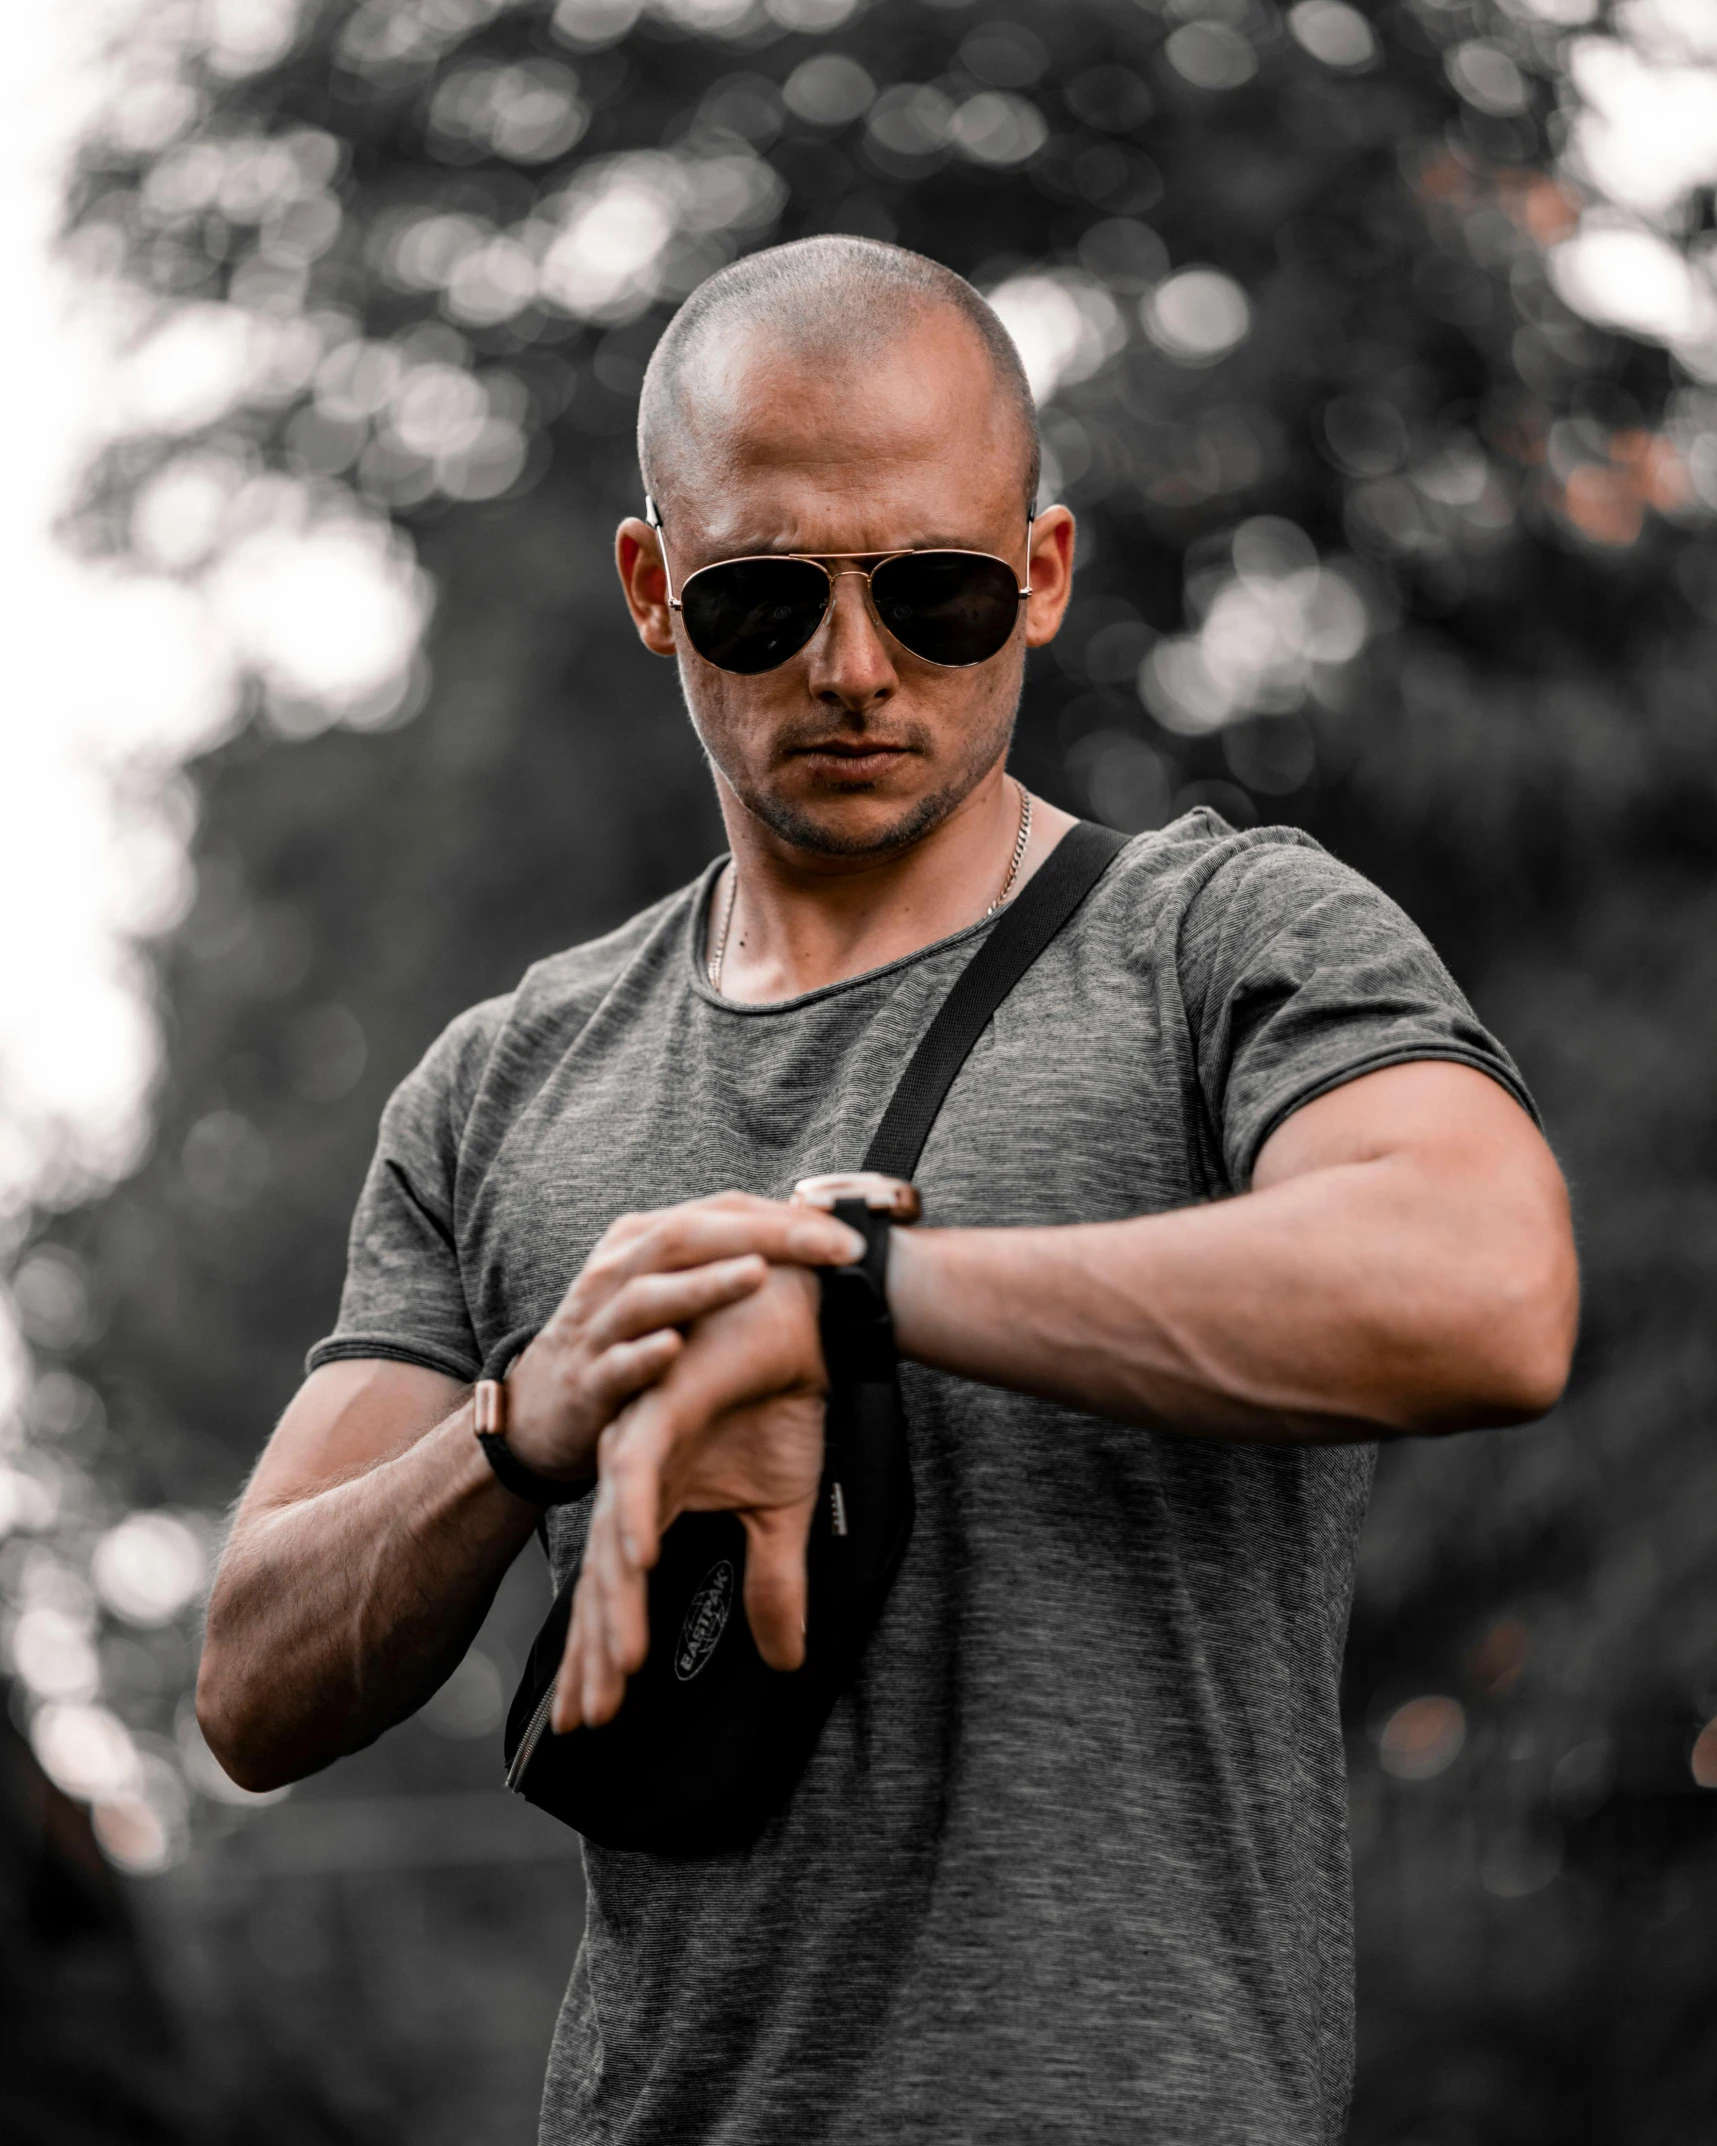 a man in sunglasses is looking at his watch, inspired by Daryush Shokof, buzz cut, holding pdw, profile image, dark photo